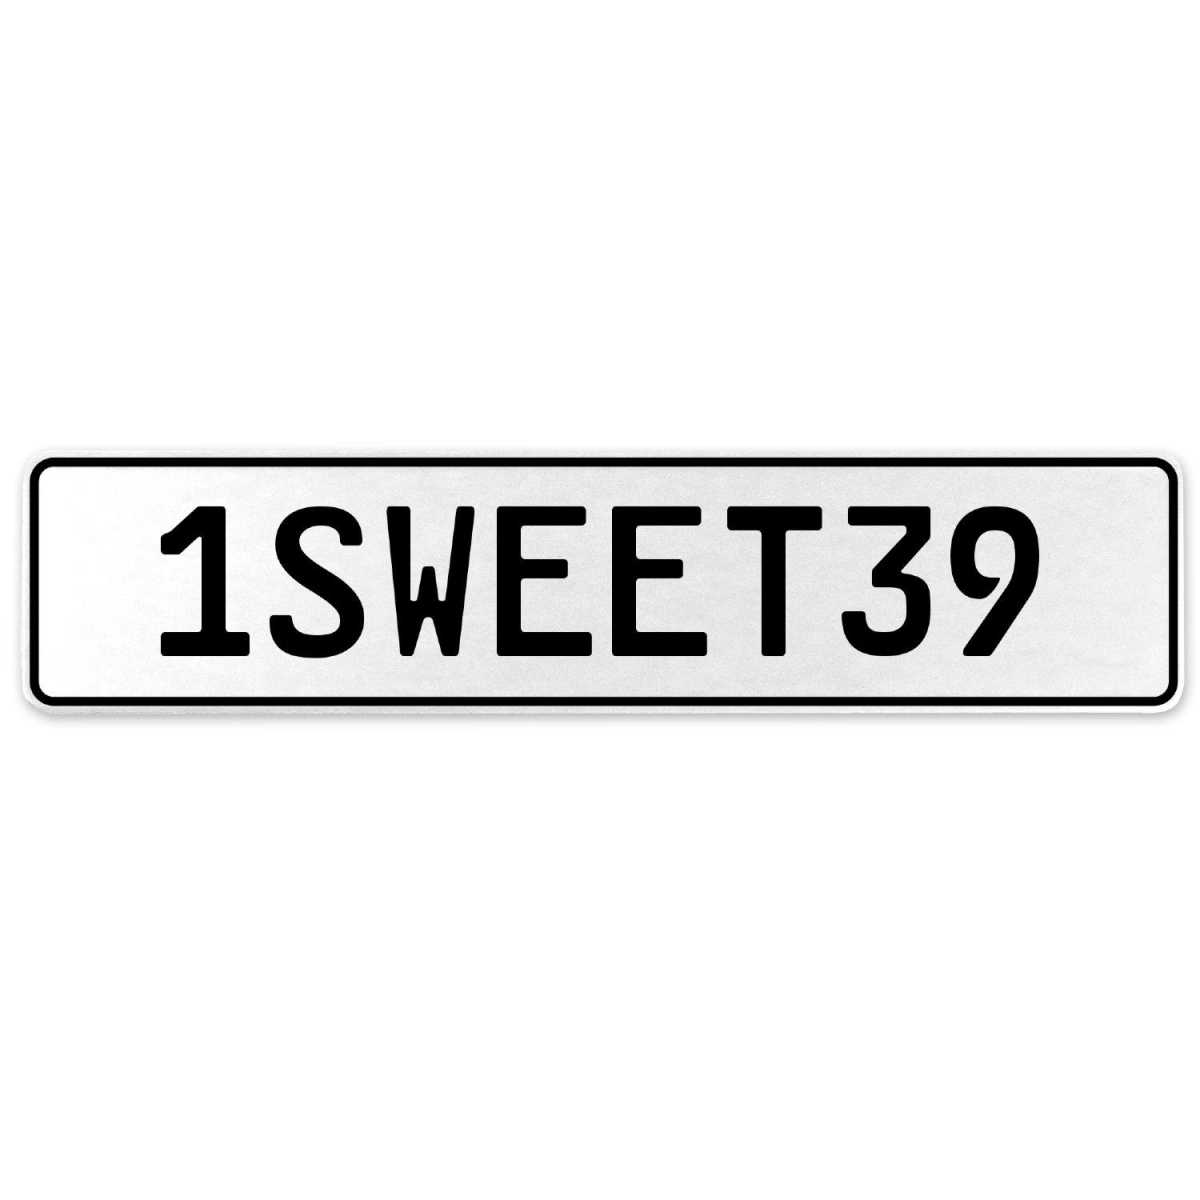 554240 1sweet39 - White Aluminum Street Sign Mancave Euro Plate Name Door Sign Wall